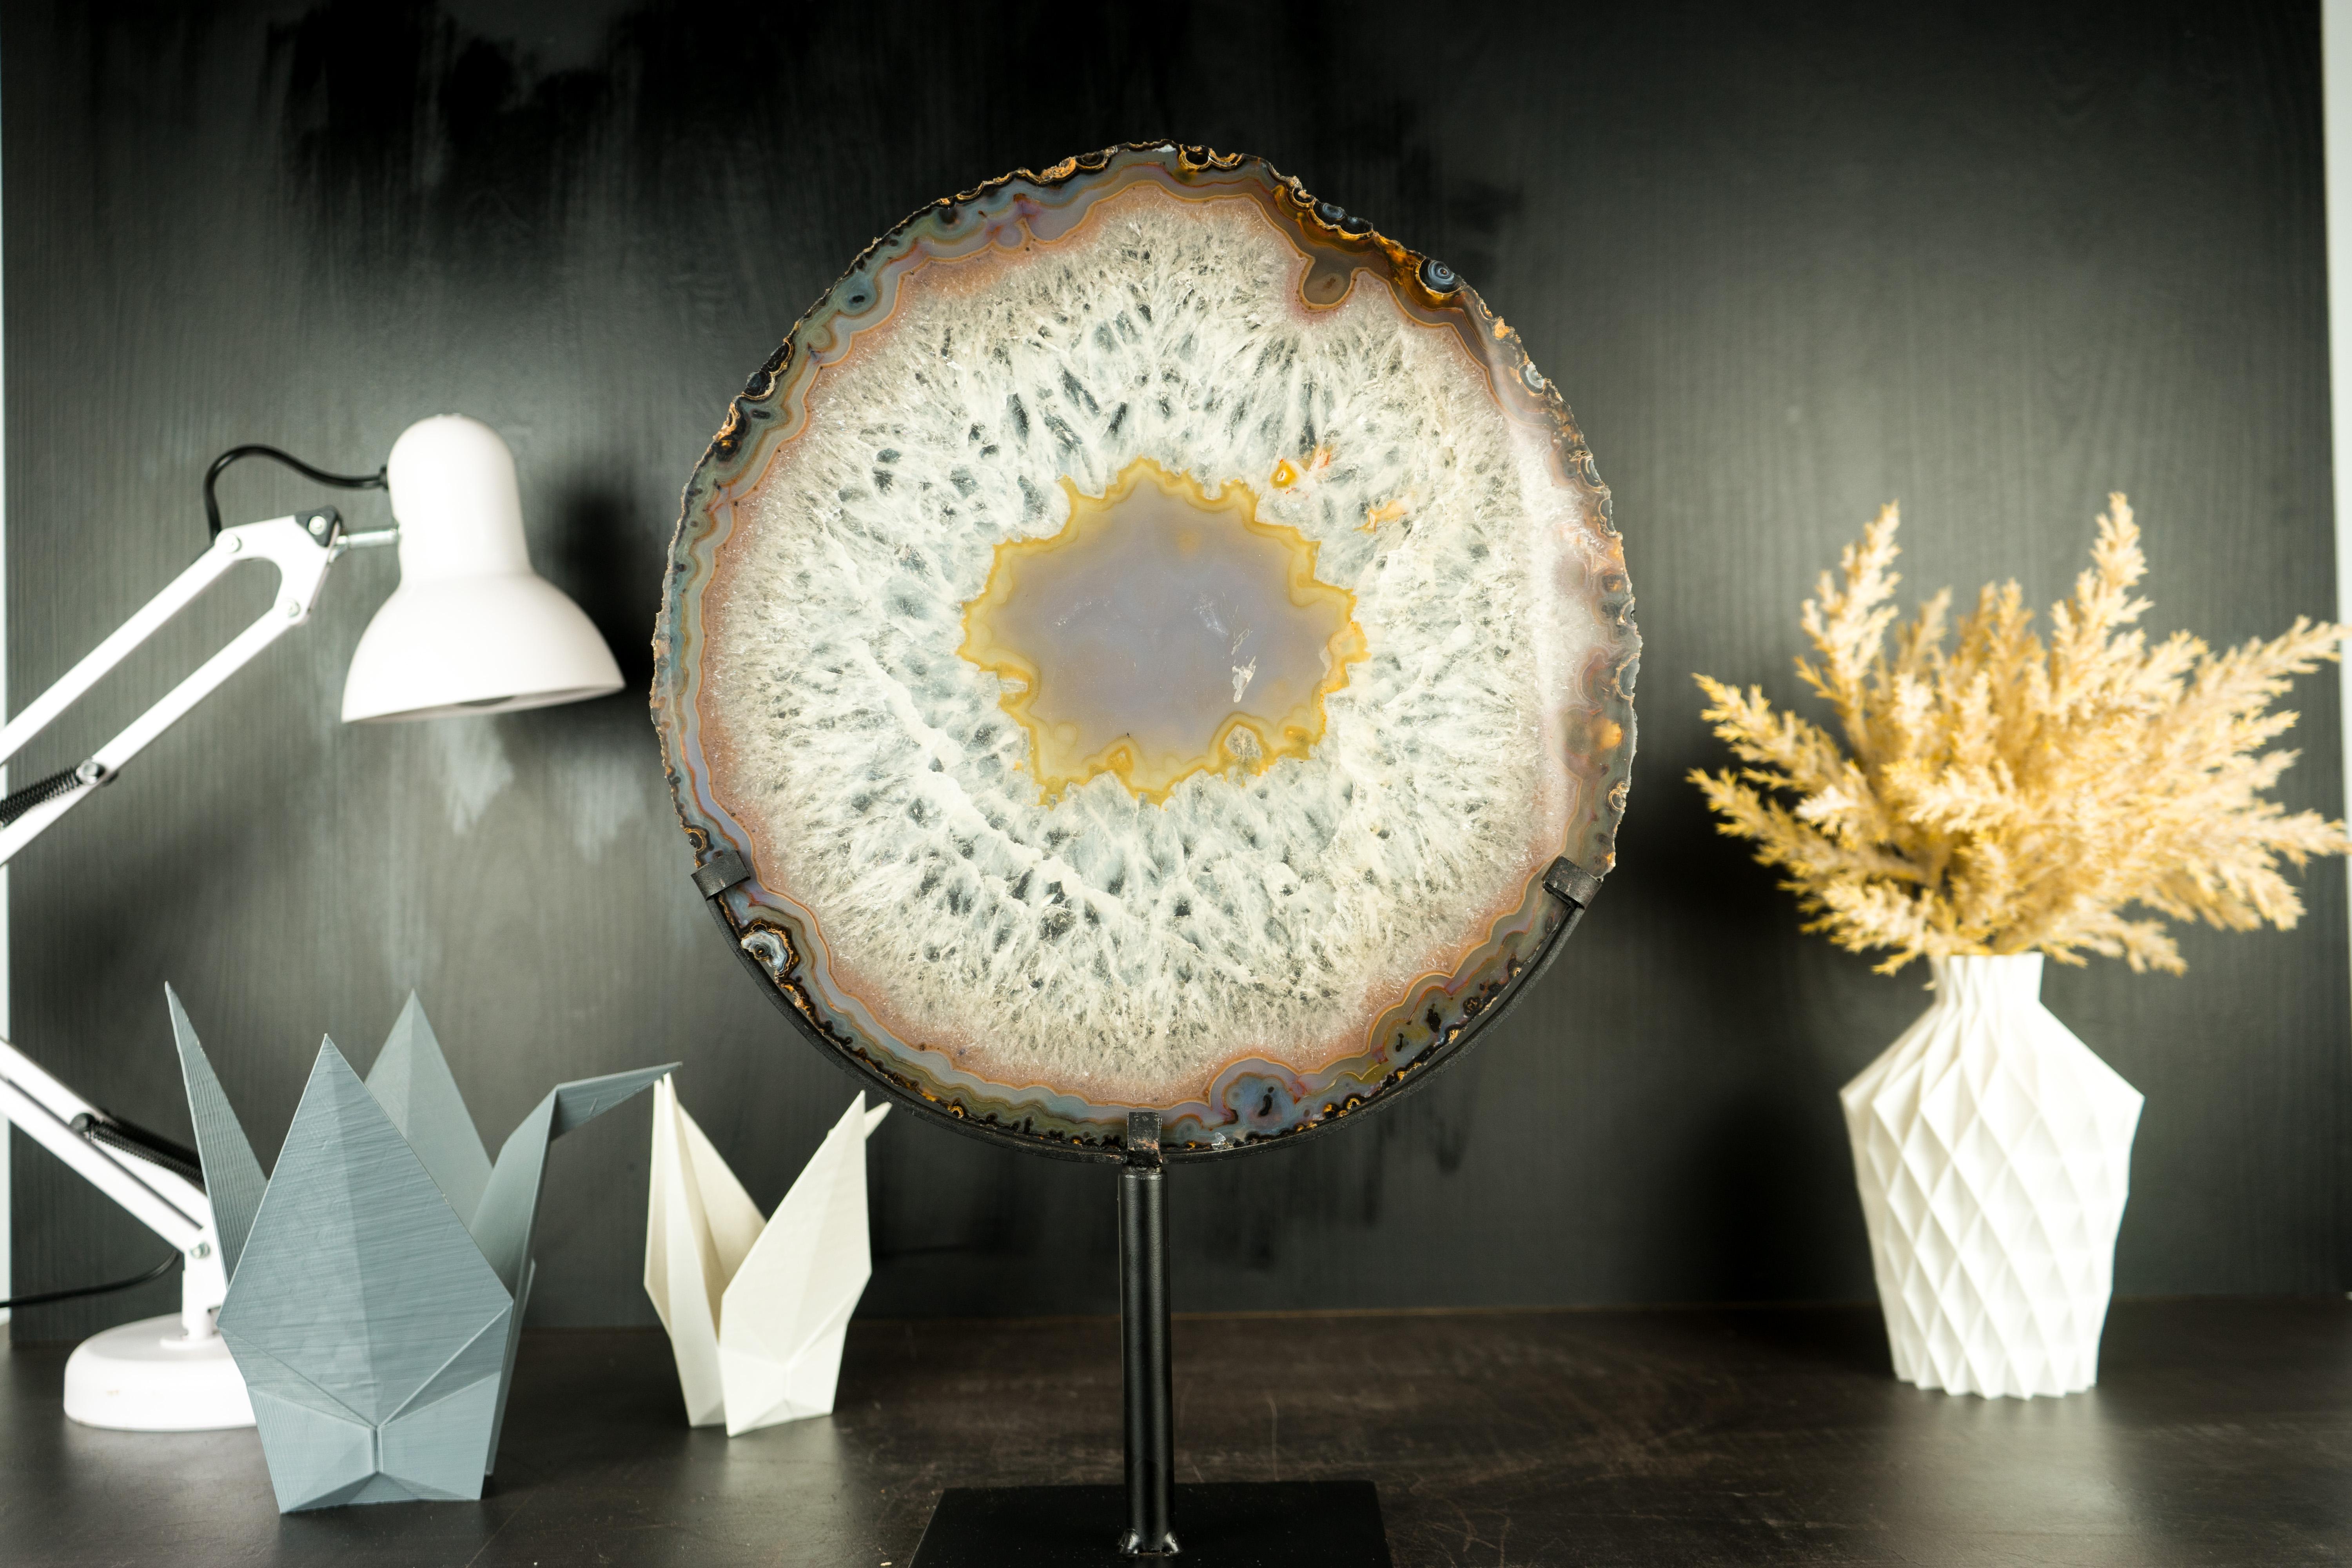 Brazilian World-Class Large Lace Agate Slice, with Ice-Like Crystal and Colorful Agate For Sale